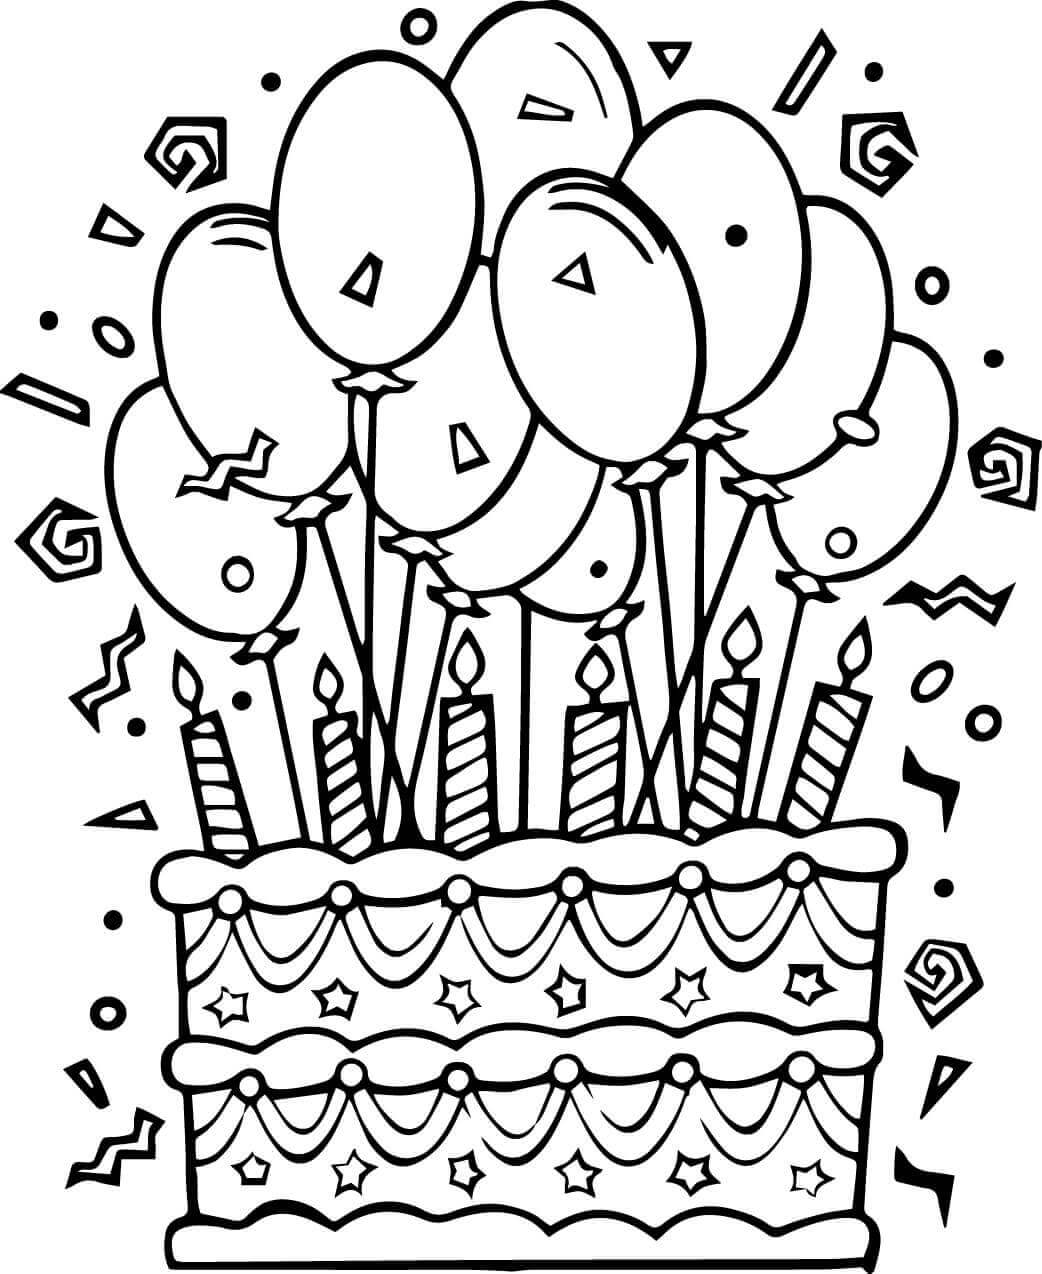 Fun Birthday Cake Coloring Pages